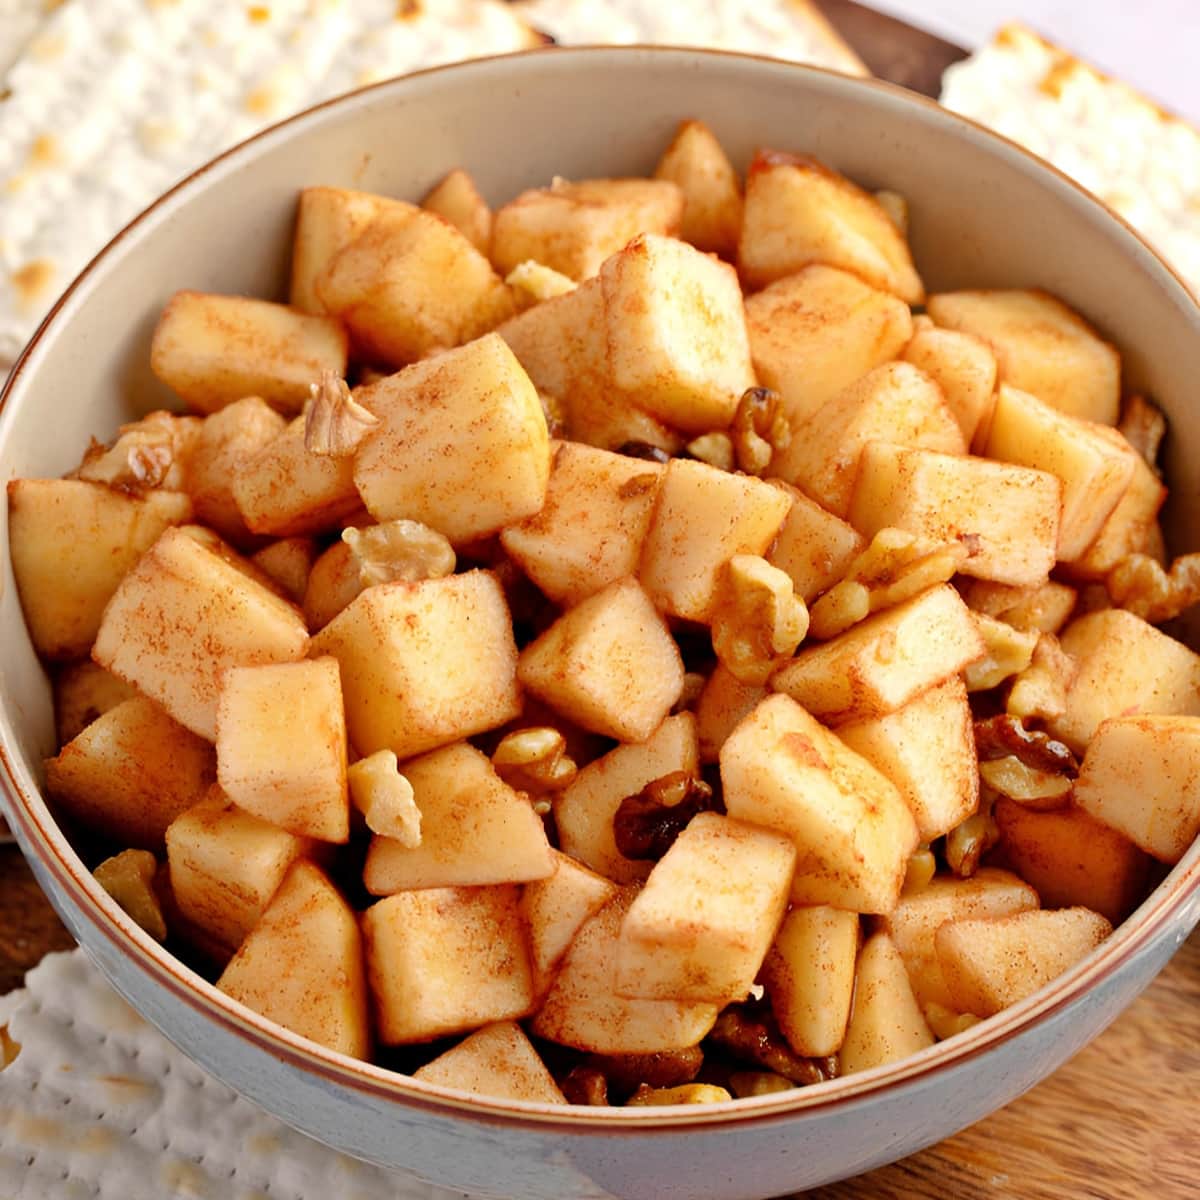 Charoset: A Bowl of Apples and Walnuts with Cinnamon